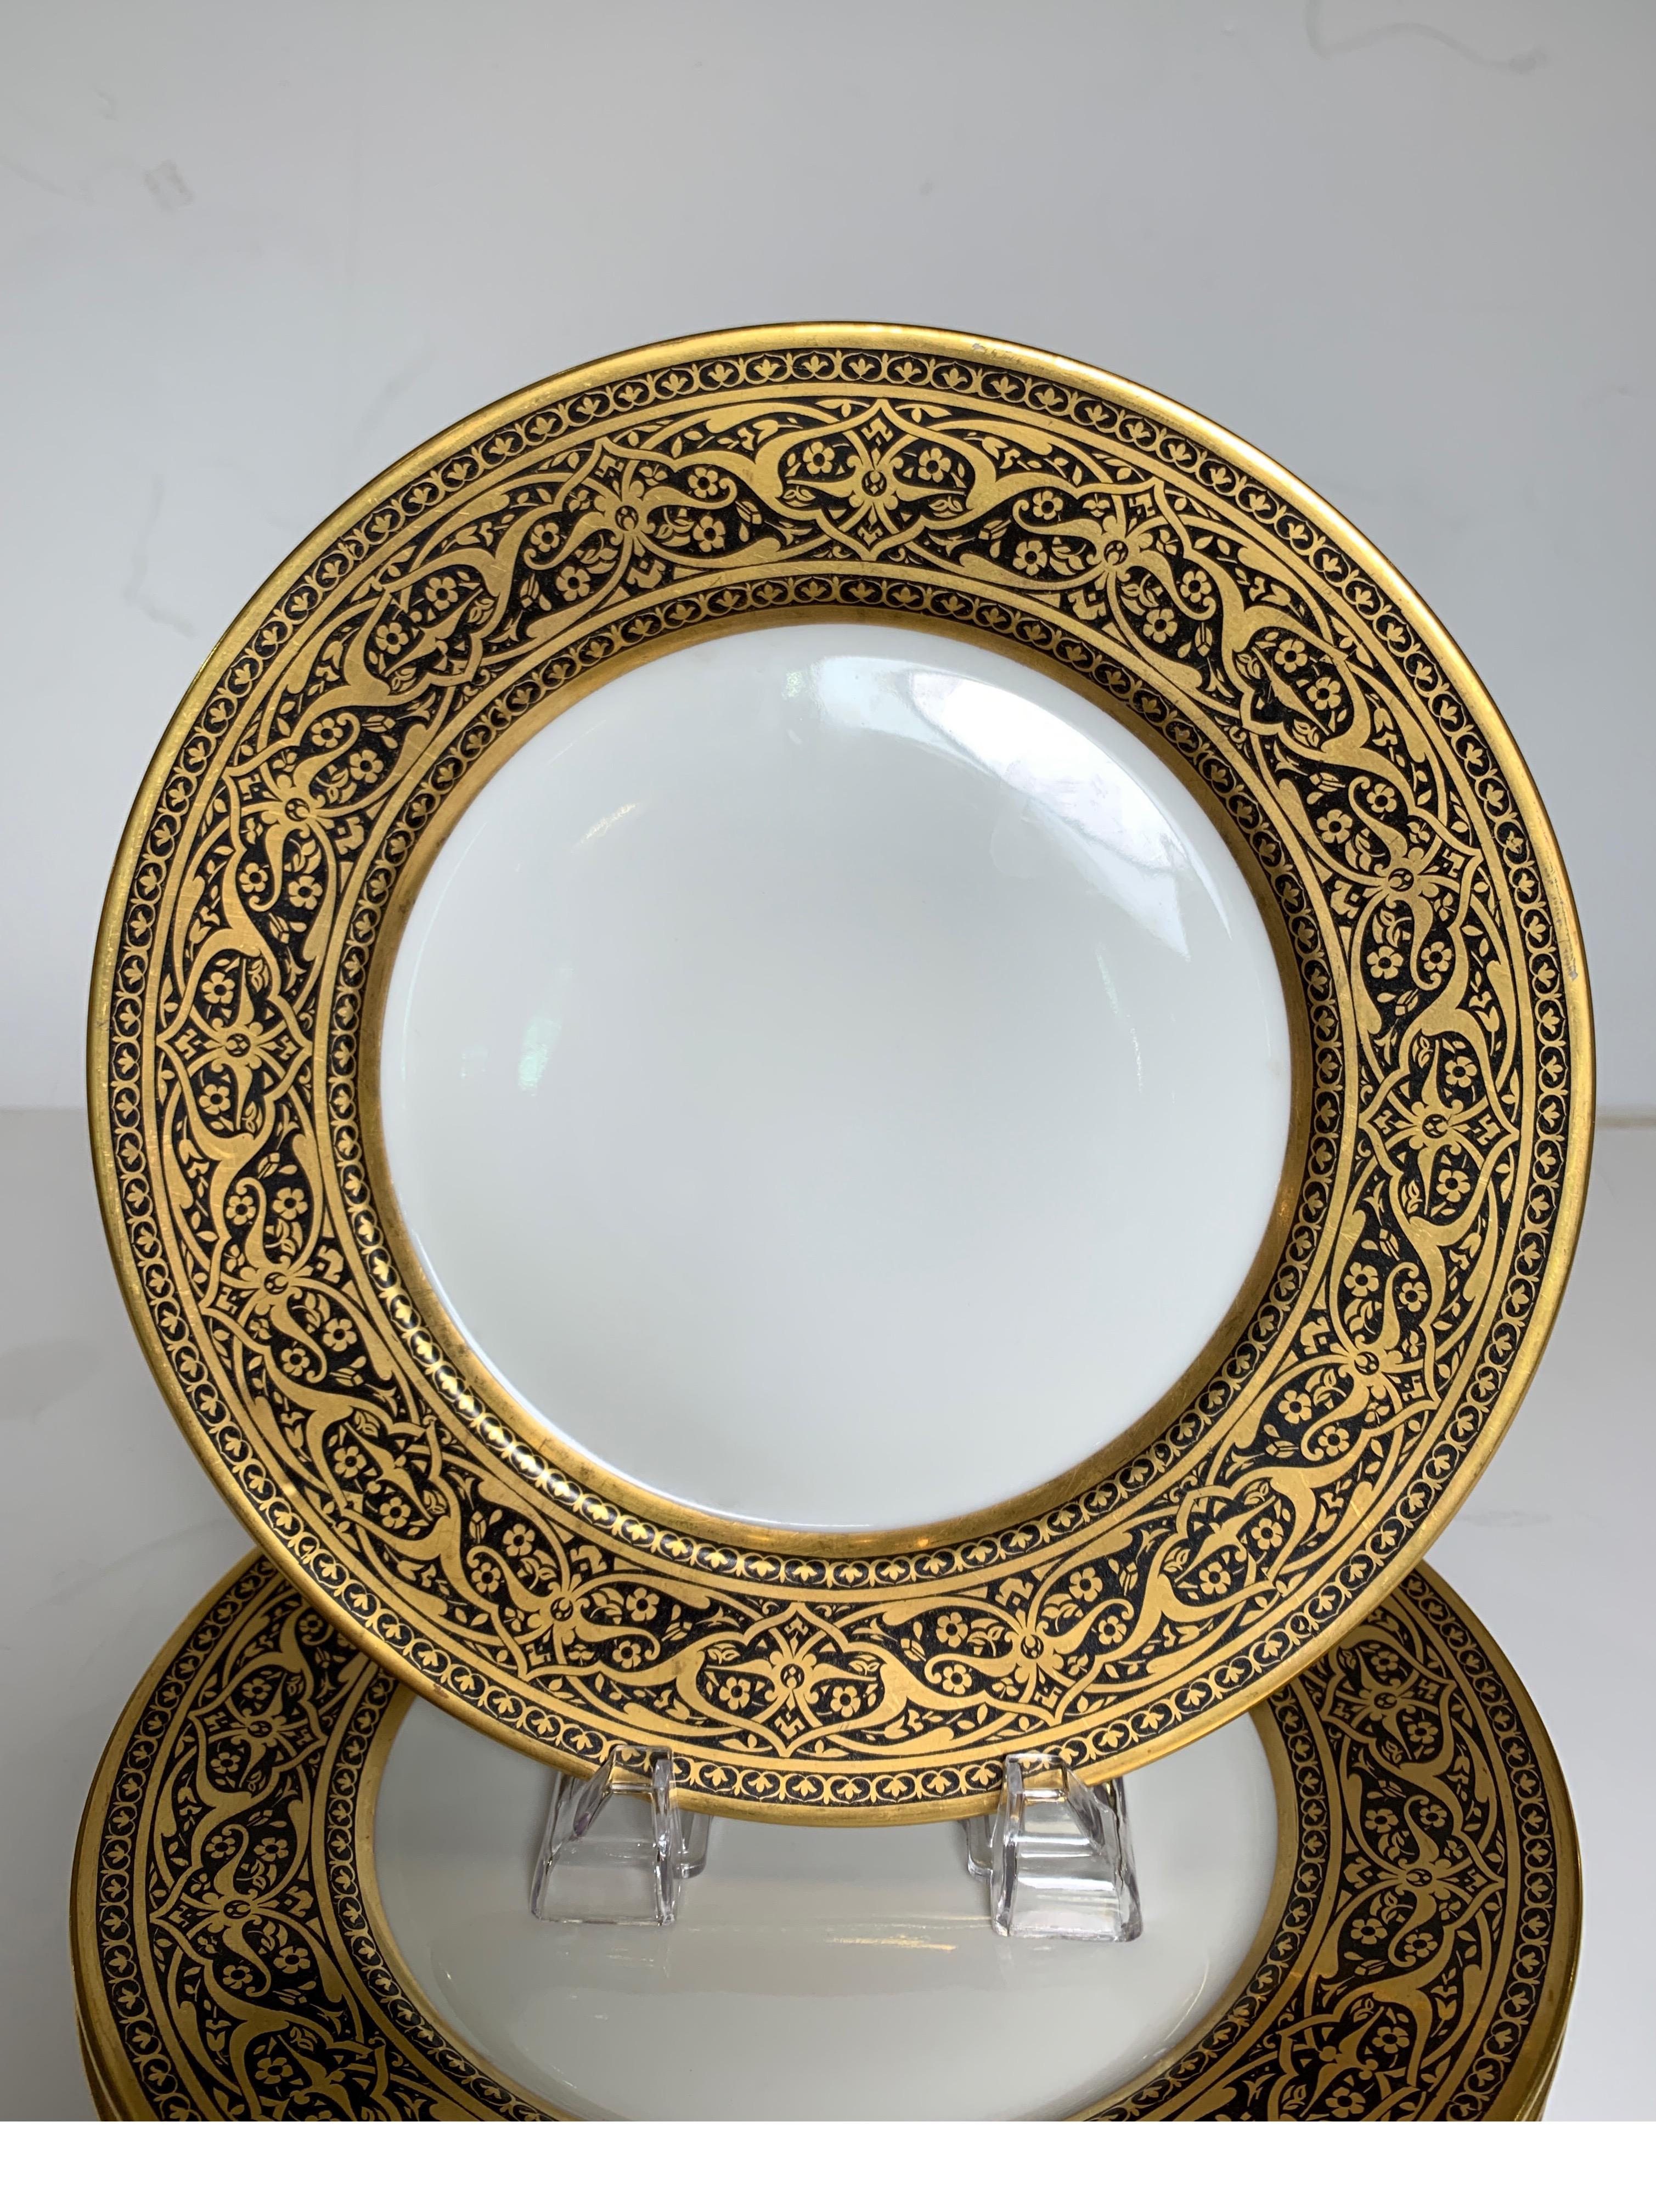 A set of 6 French black and gold service dinner plates with elaborate borders. The white porcelain with an exotic persinan style border marked Limoges France Superieur. Size: 10.5